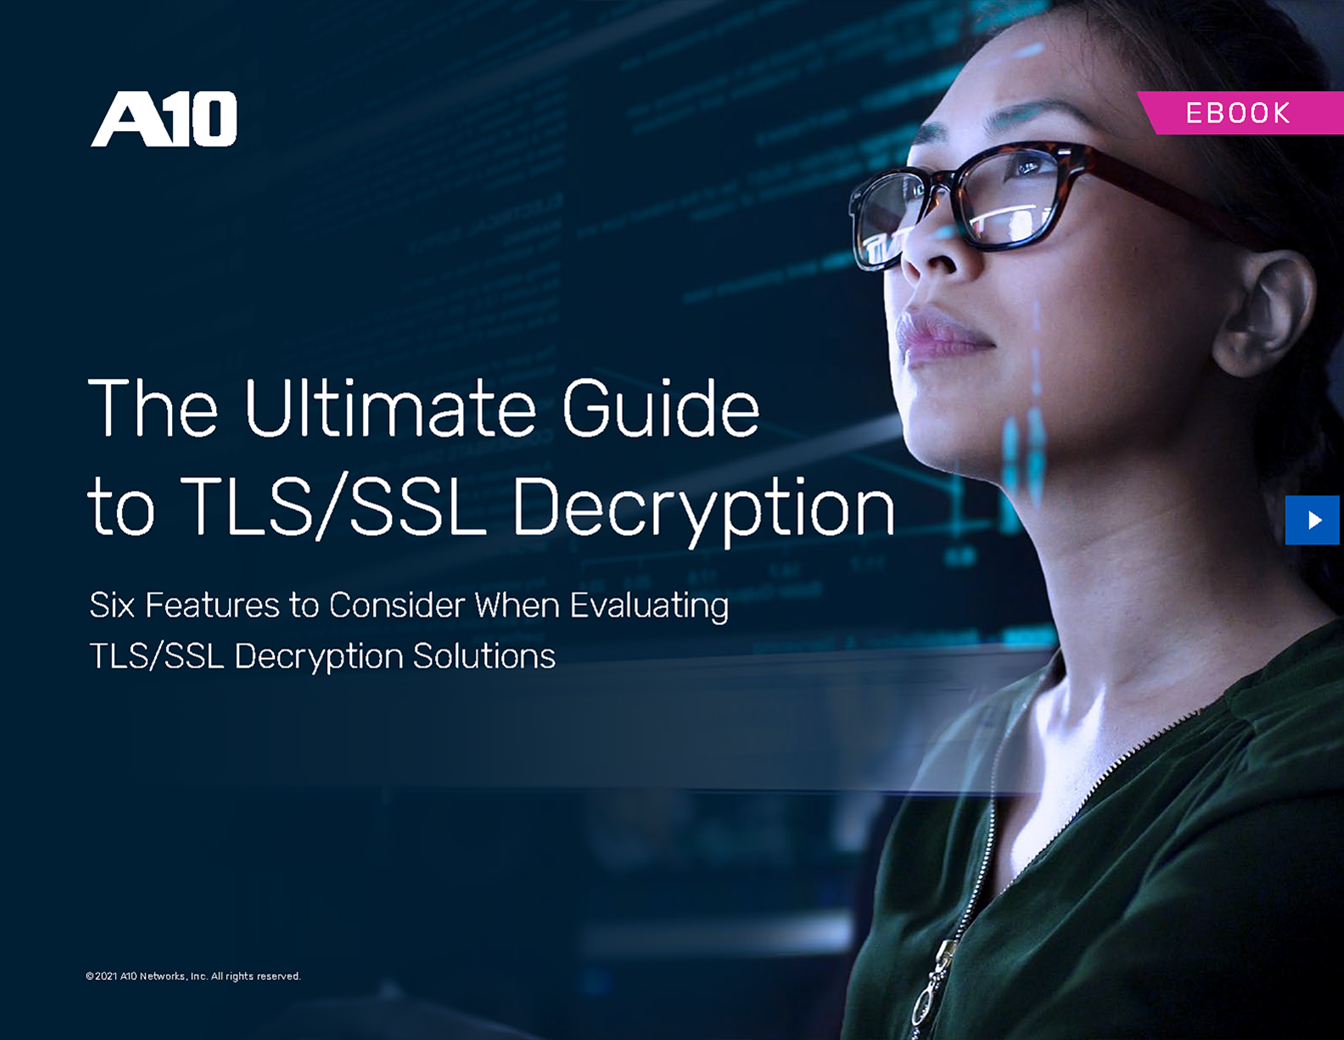 The Ultimate Guide to TLS/SSL Decryption eBook Cover